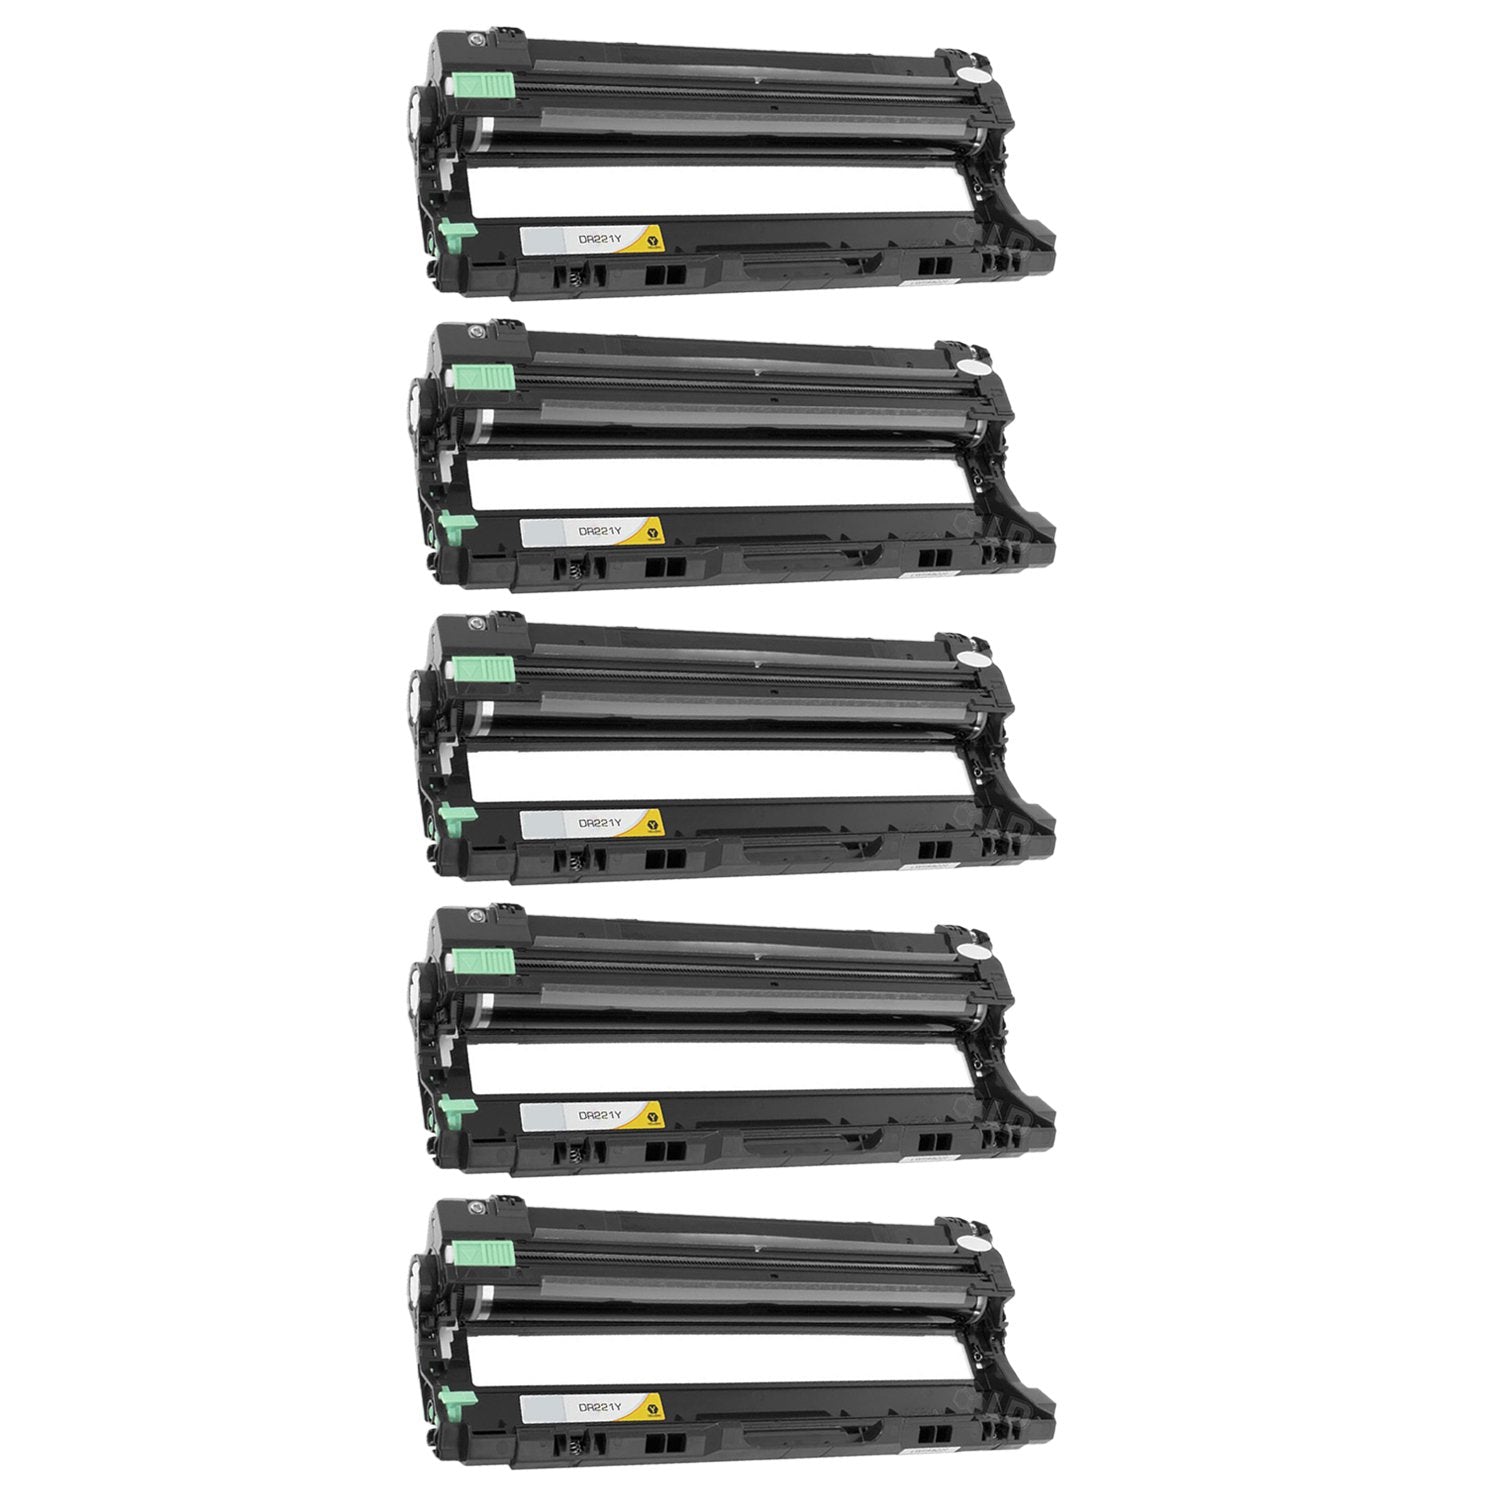 Absolute Toner Compatible Brother DR221 Yellow Drum Unit Toner Cartridge | Absolute Toner Brother Toner Cartridges